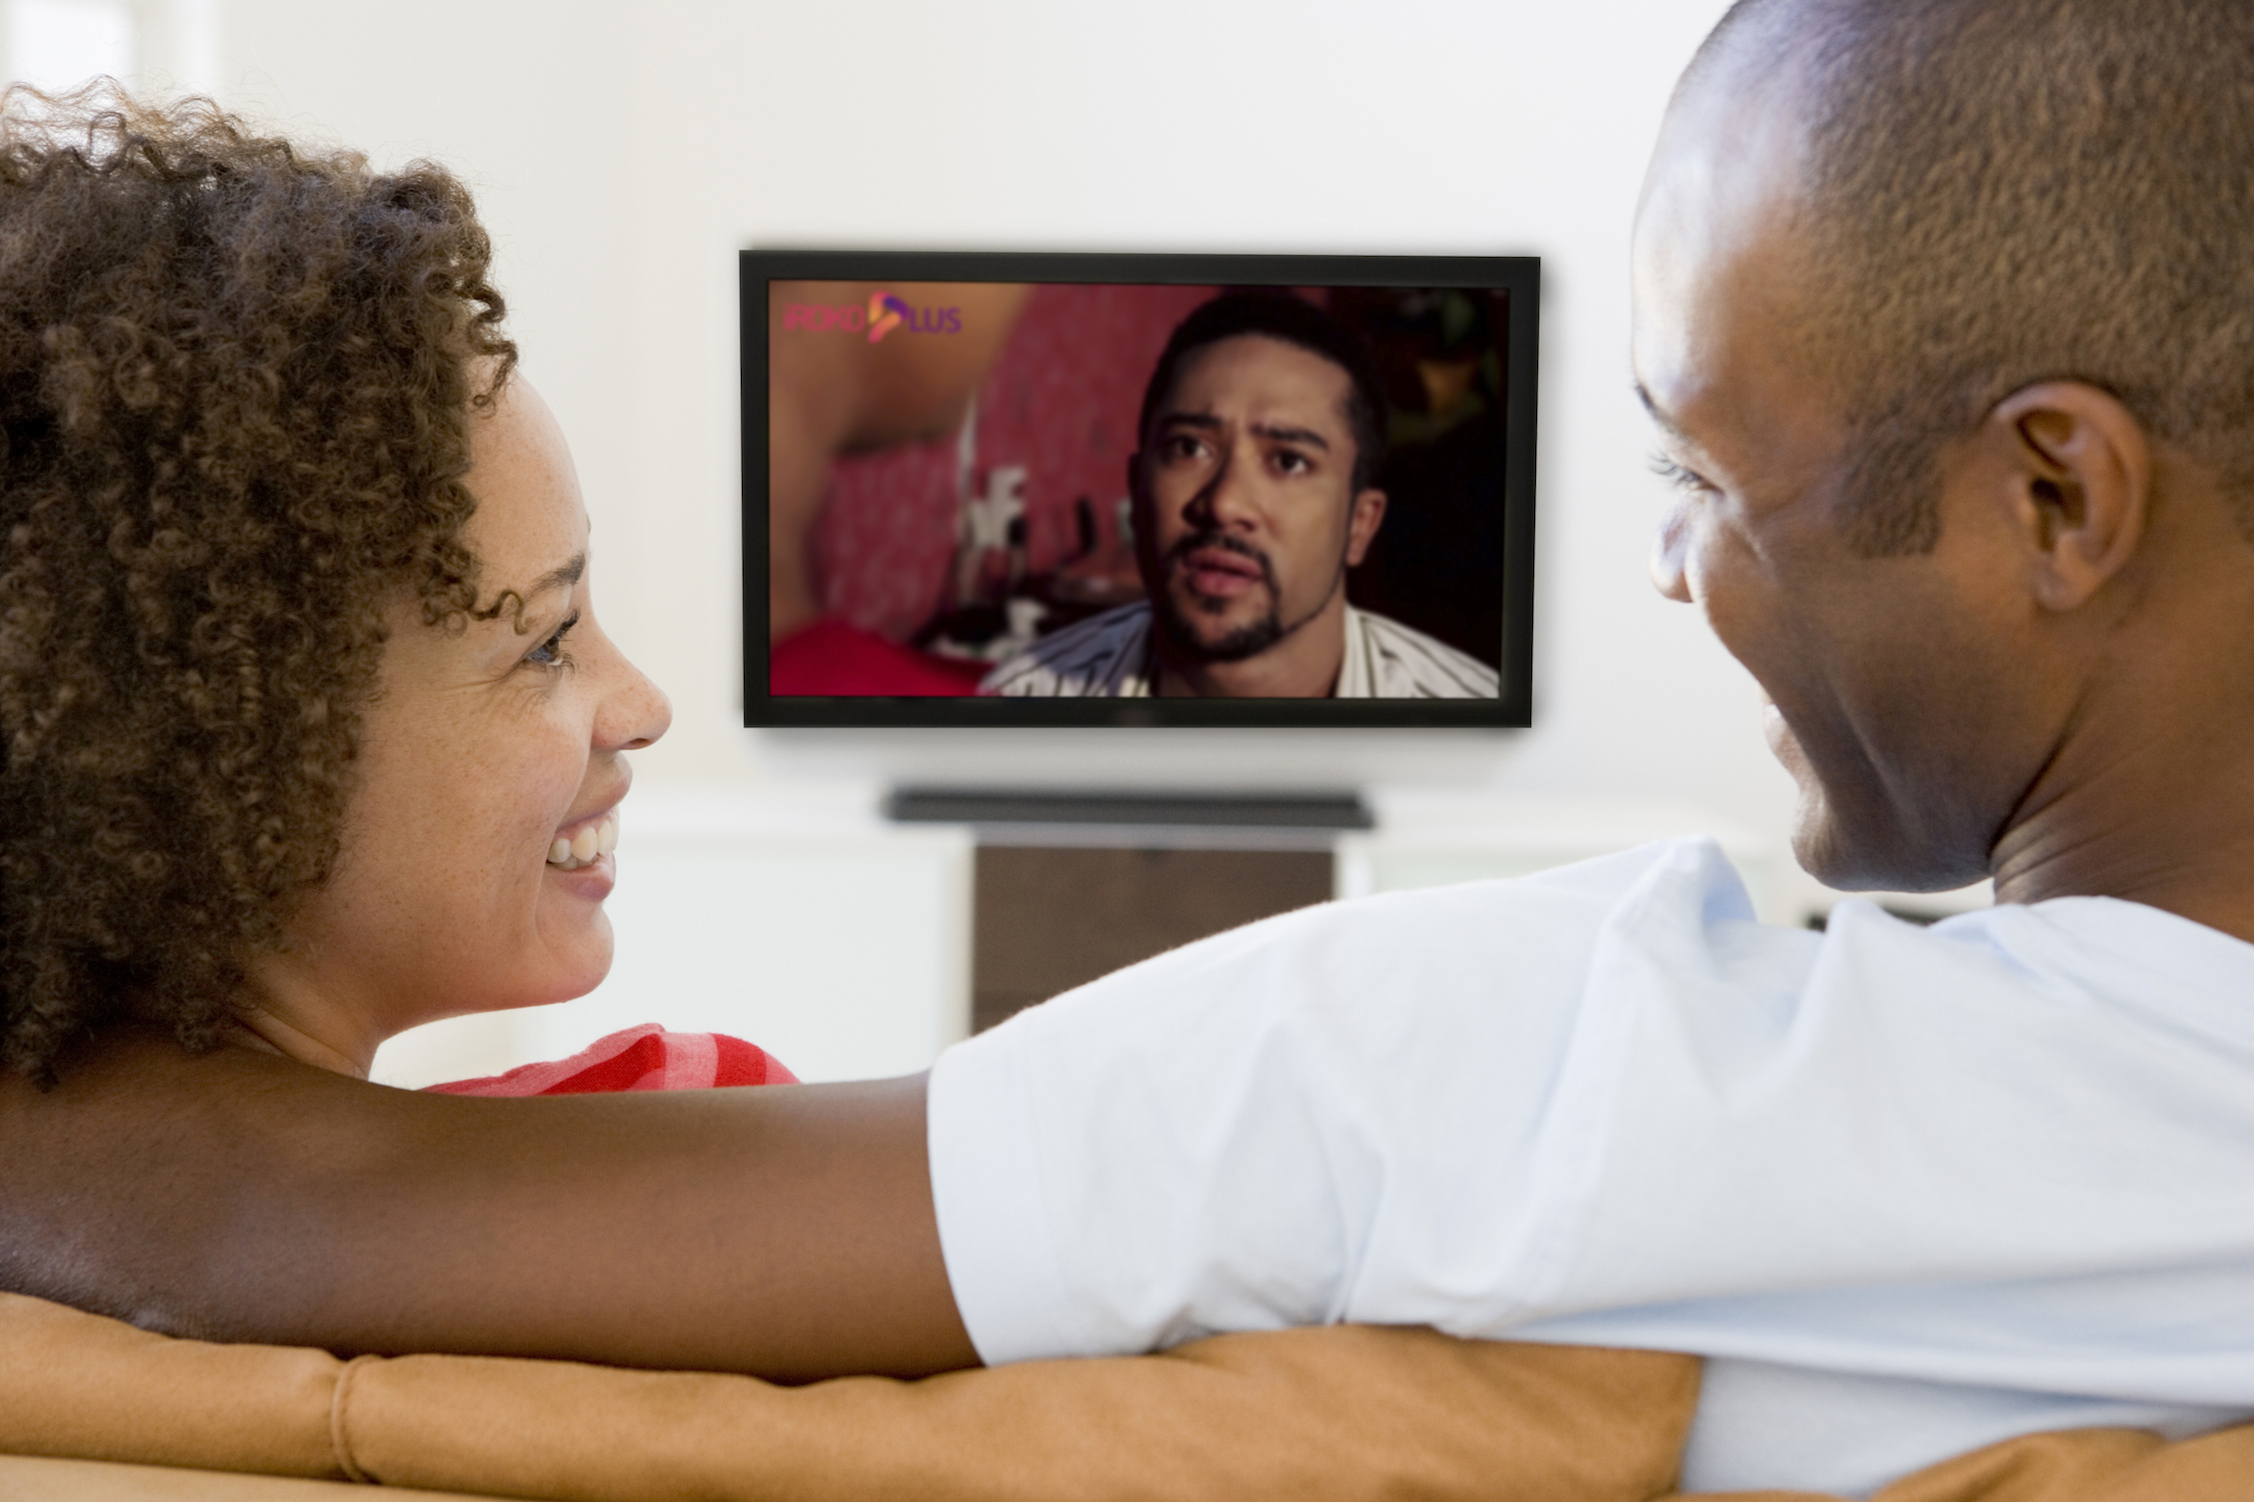 IROKOtv Turns to Digital TV to Disrupt Video Content Distribution Across Africa